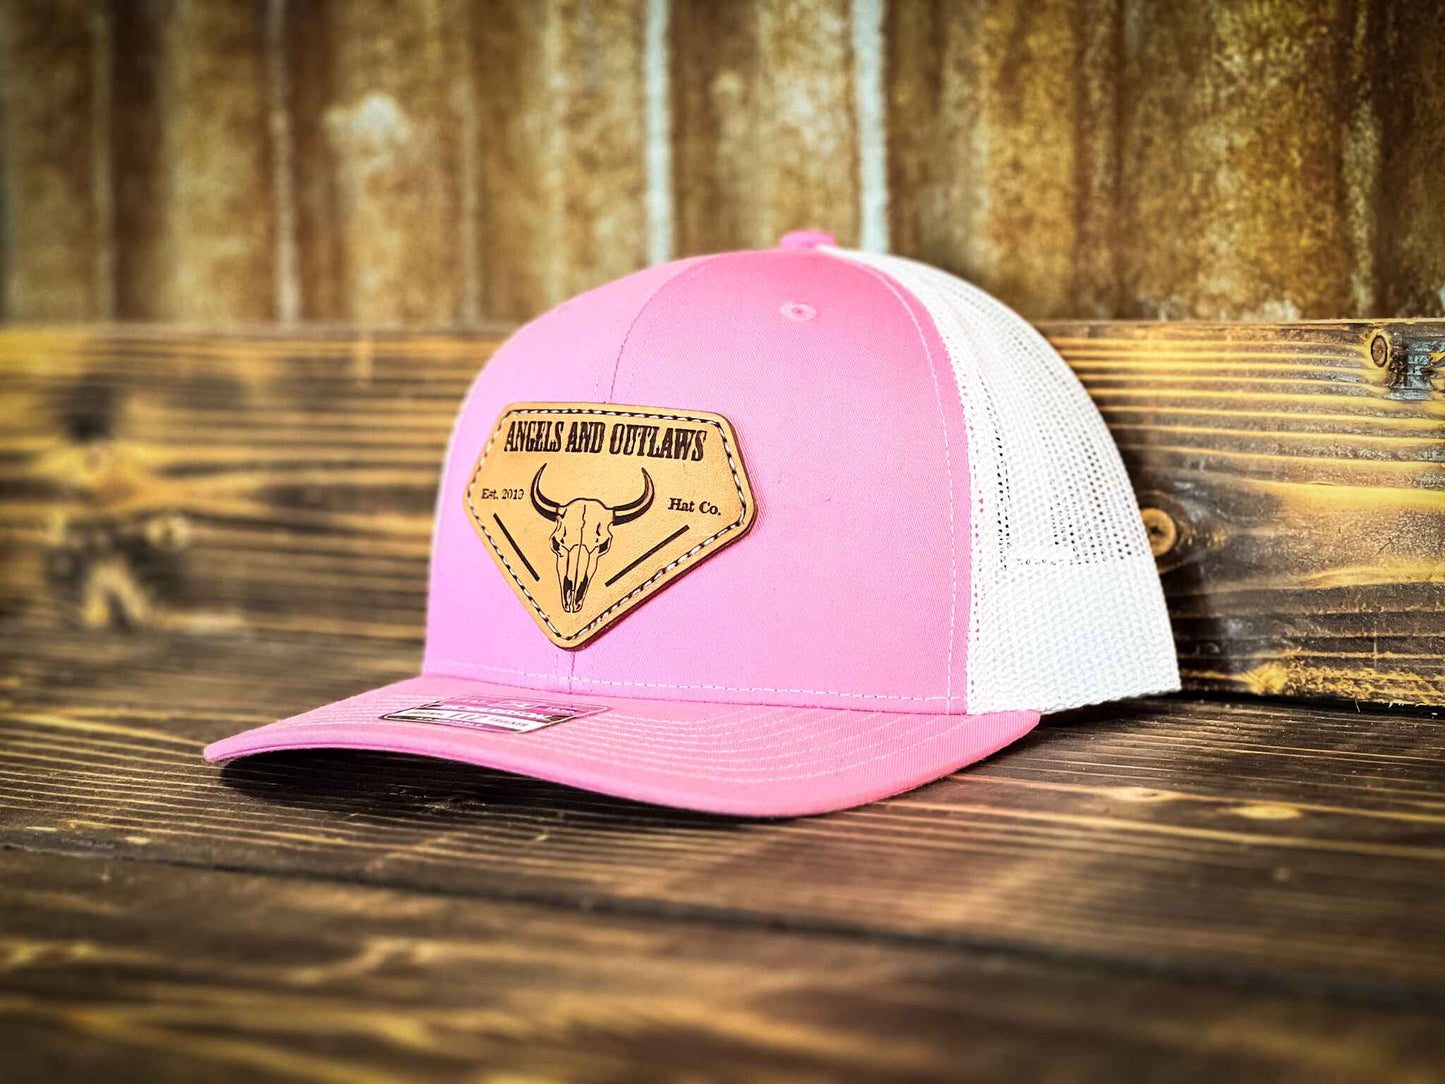 Pink front white back Mesh back trucker hat with Angels and Outlaws name and a bison skull engraved on a leather patch